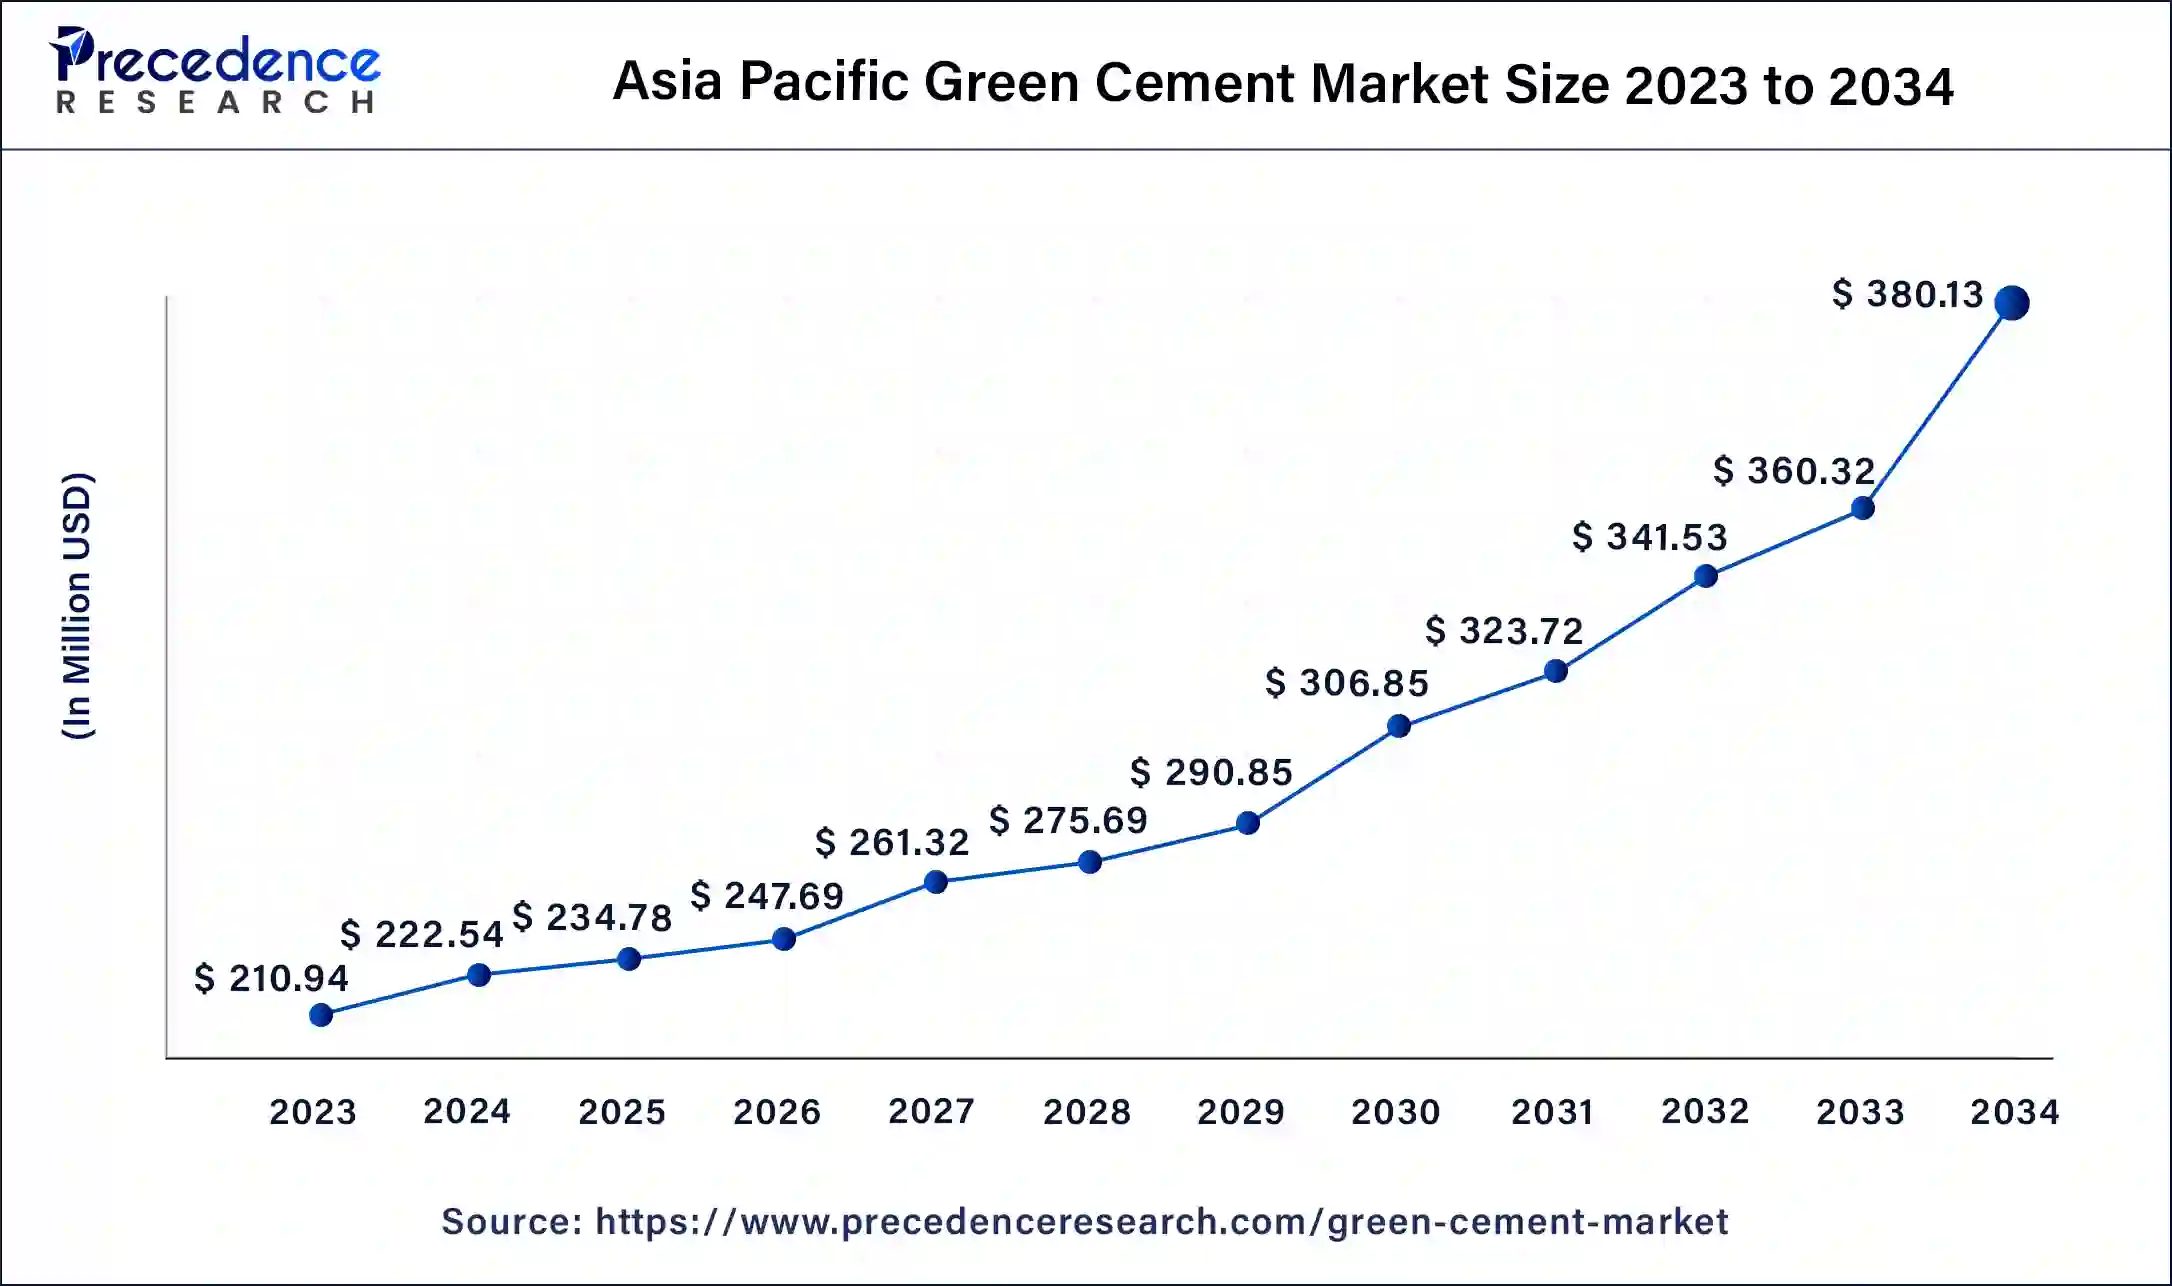 Asia Pacific Green Cement Market Size 2023 to 2034